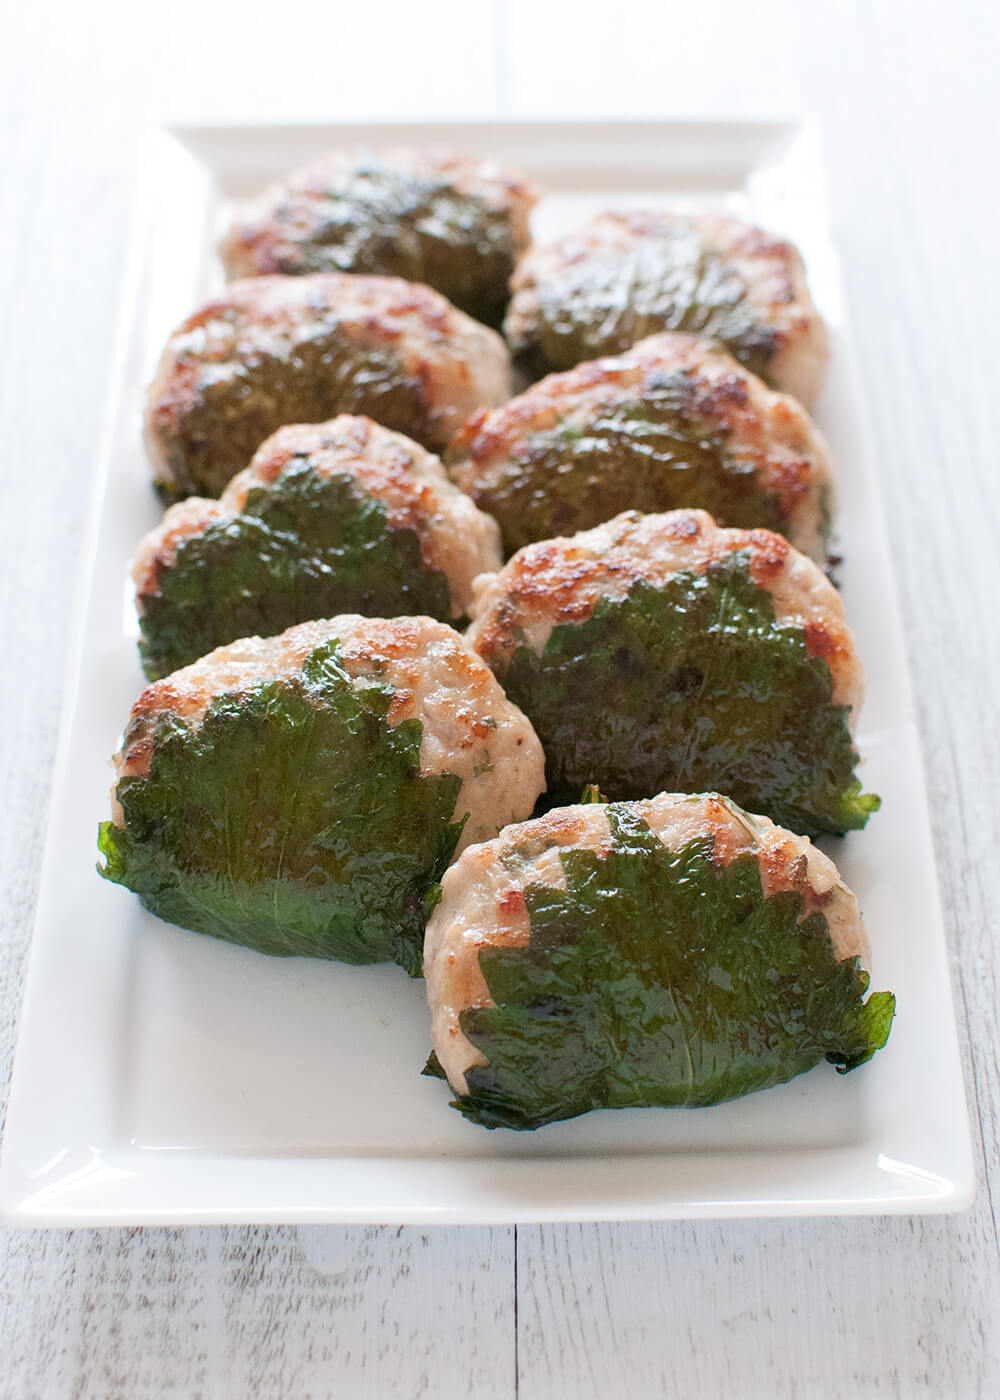 Tofu mixed in the meat makes the patties bouncy and soft. Flavoured with miso and soy sauce, these chicken patties don’t need sauce to go with them. Shiso (perilla) leaves wrapped around the patties decorate them and give an extra Japanese touch to the dish.